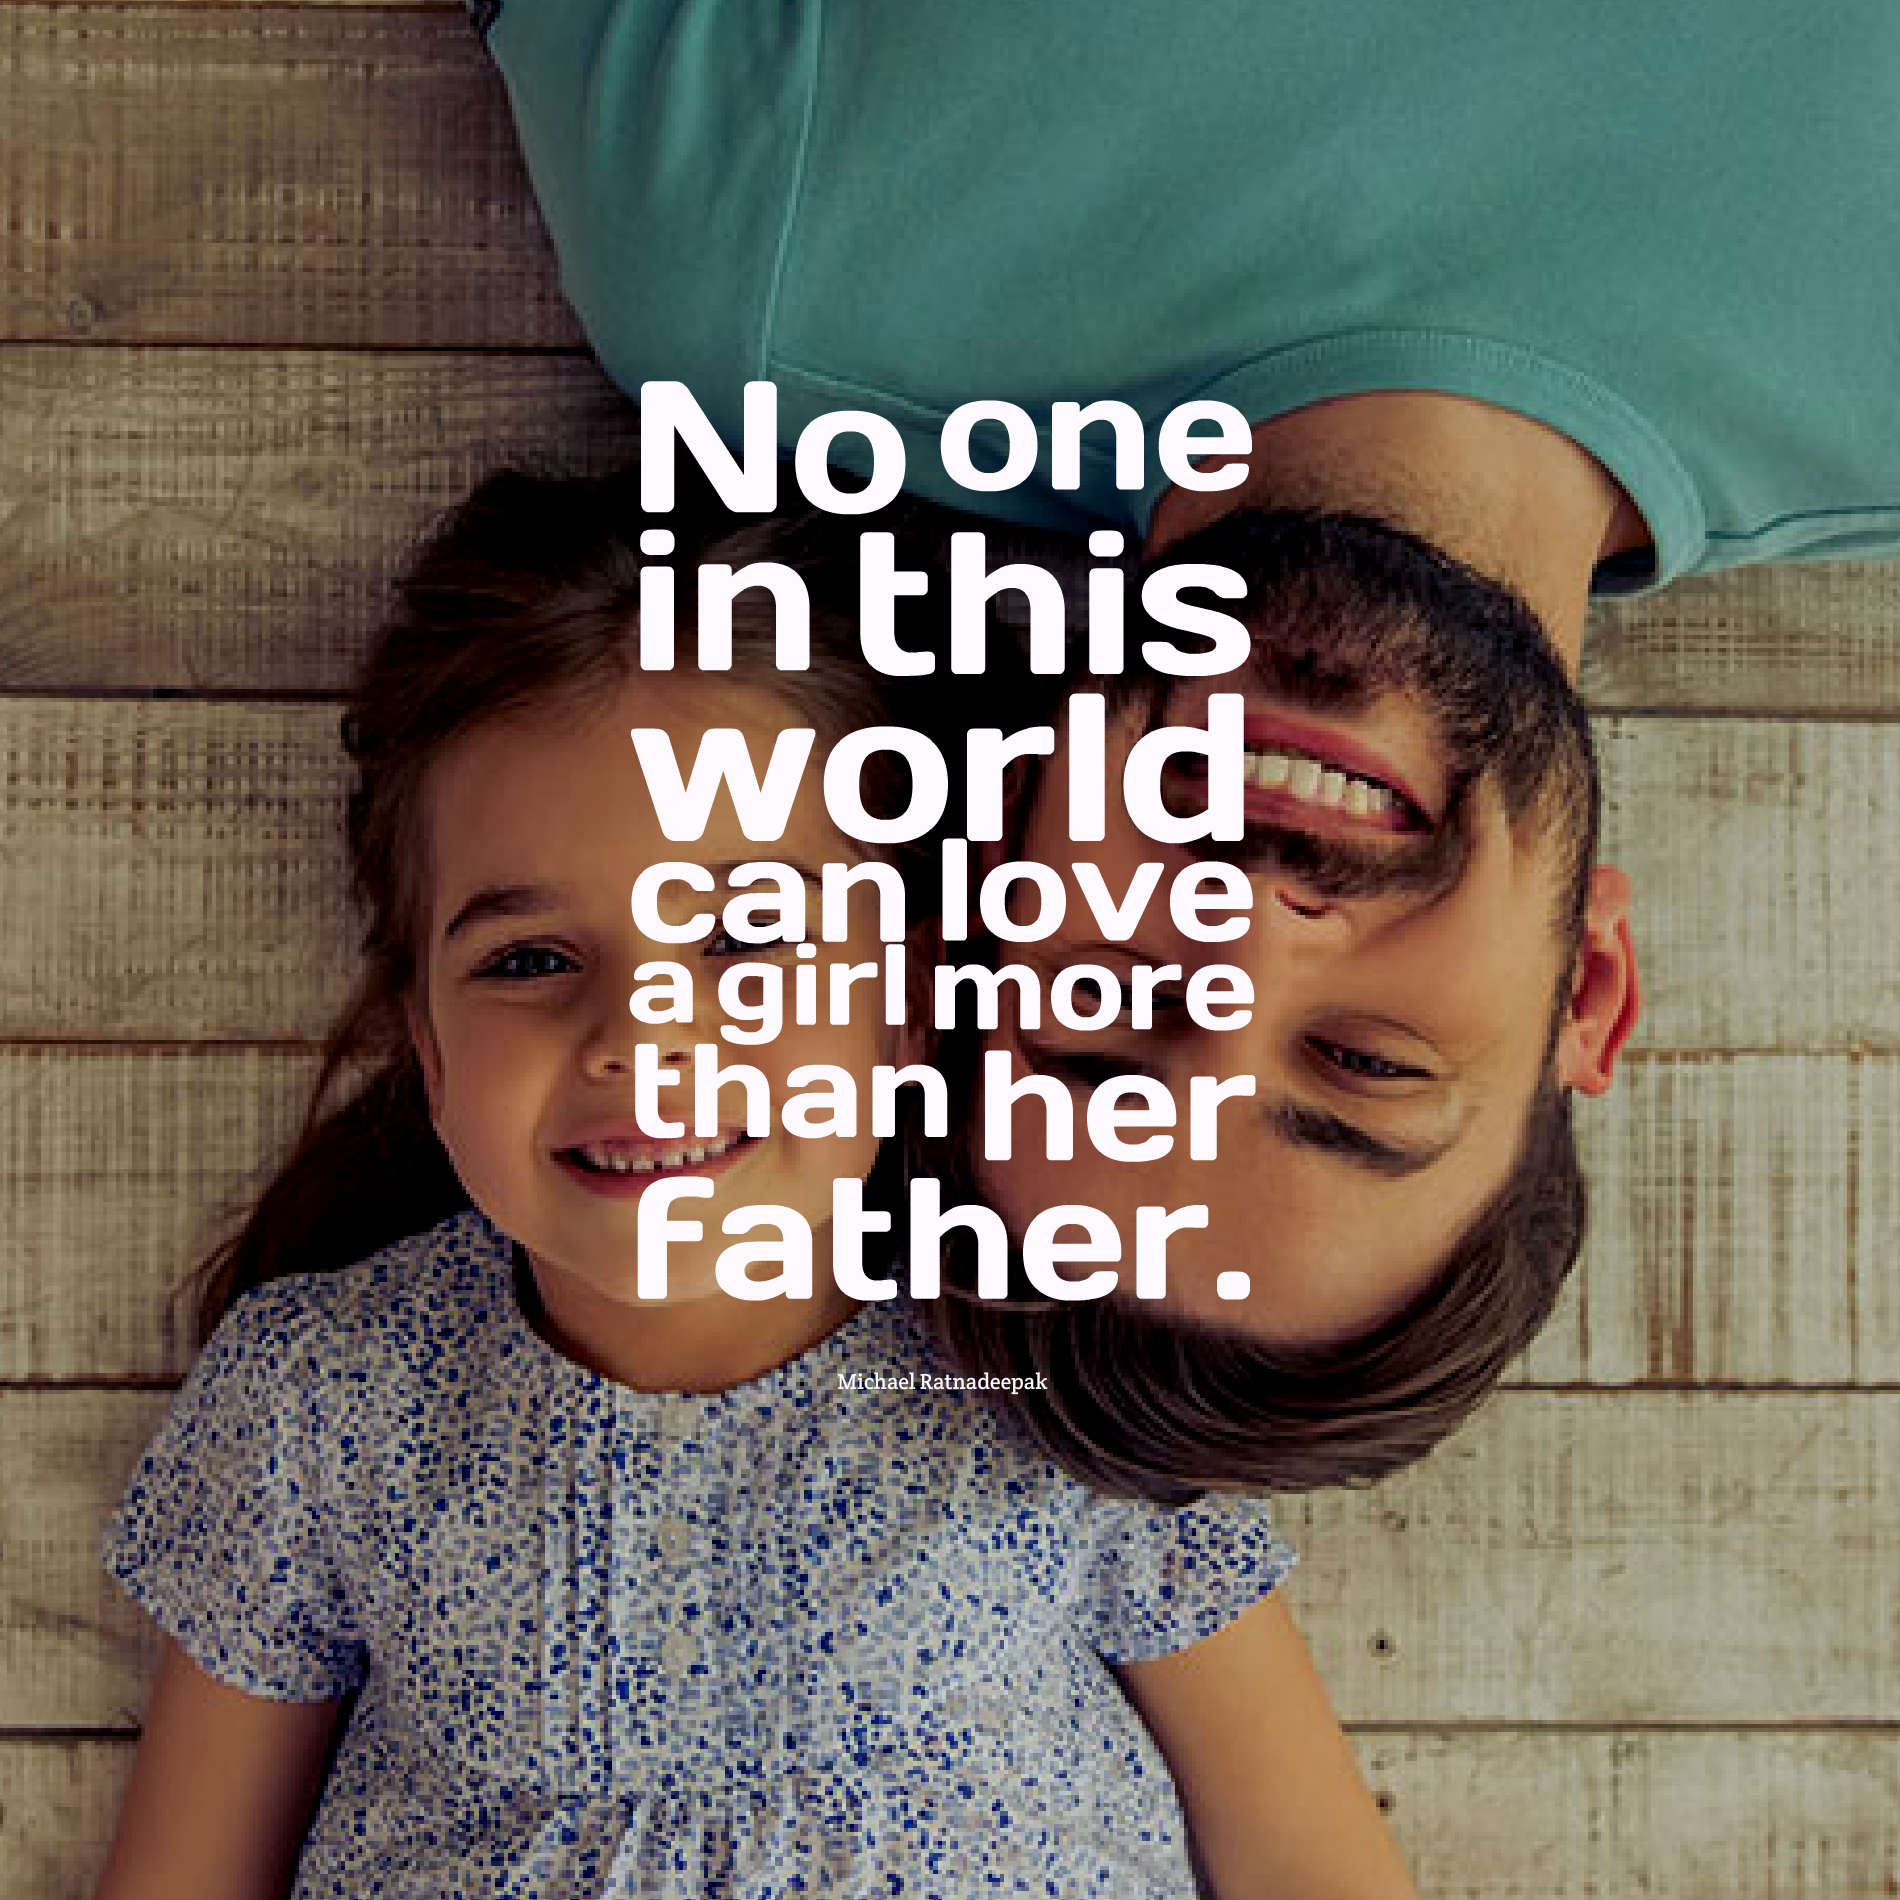 No one in this world can love a girl more than her father.